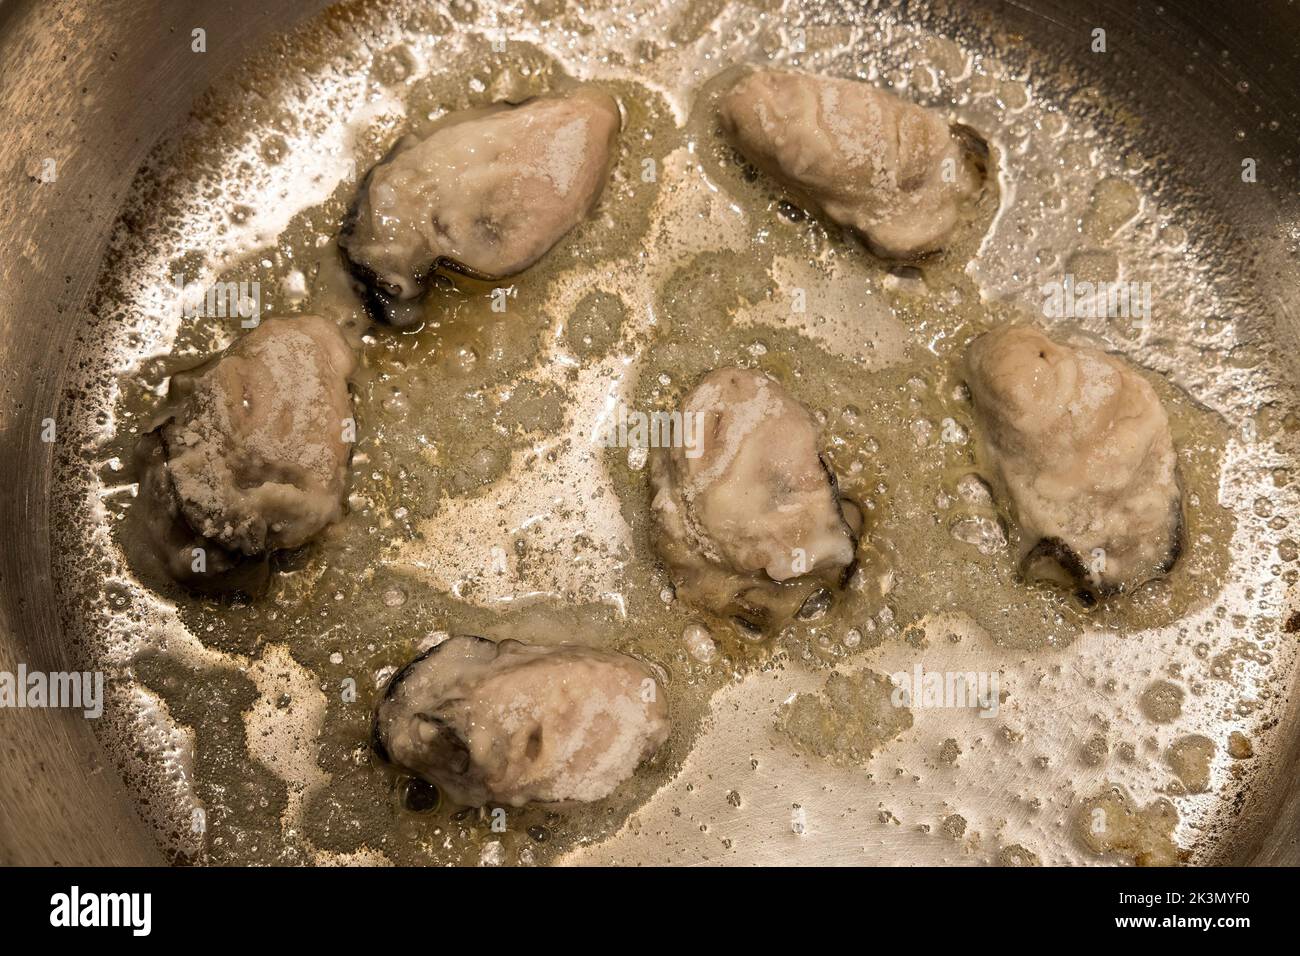 Oysters frying in butter, UK Stock Photo